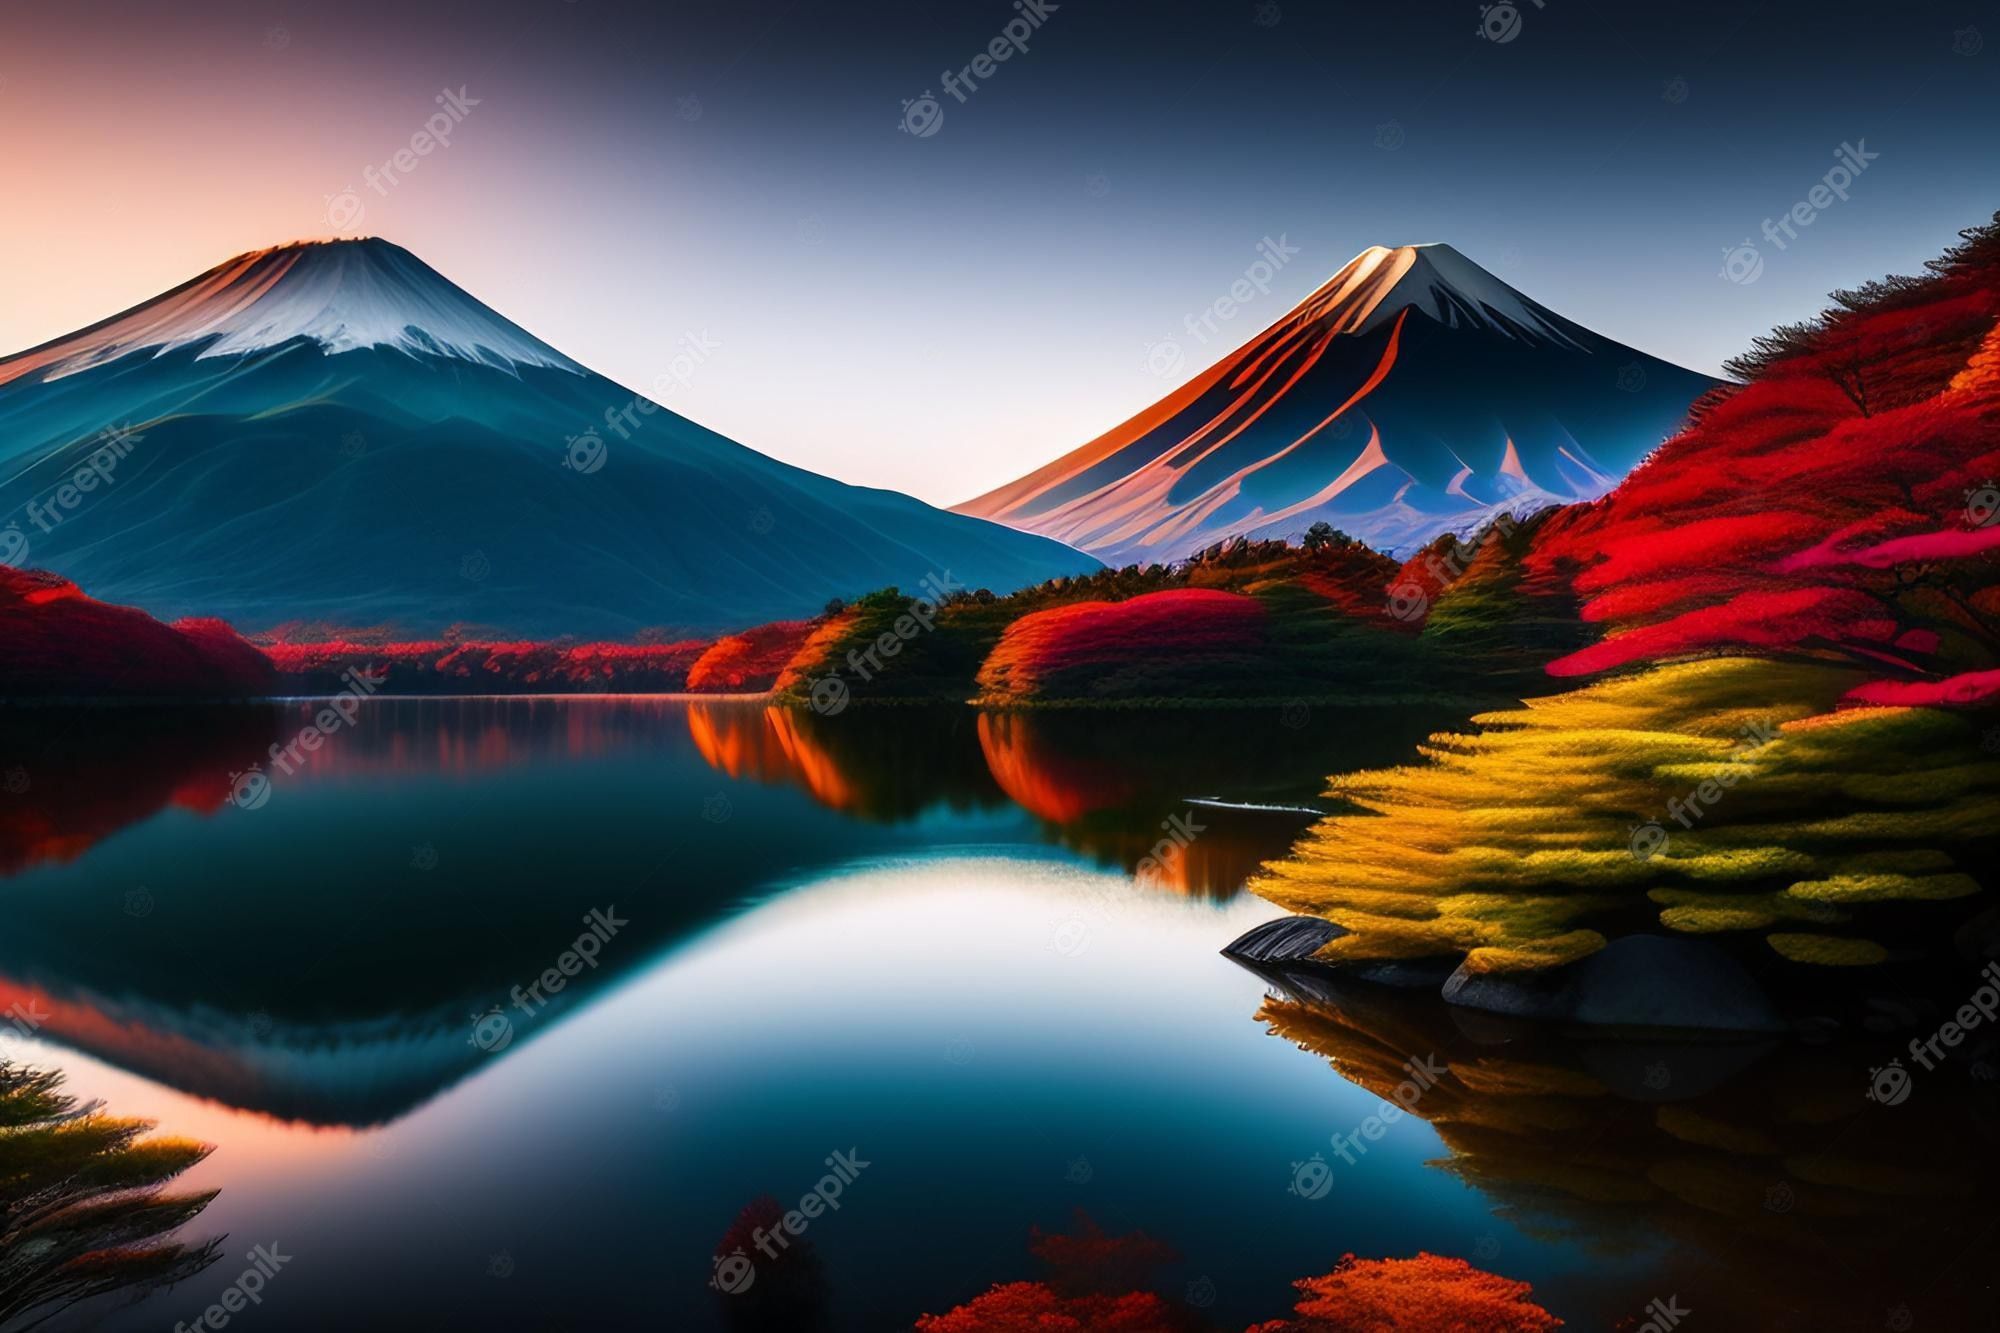 A beautiful mountain landscape with colorful trees and water - Lake